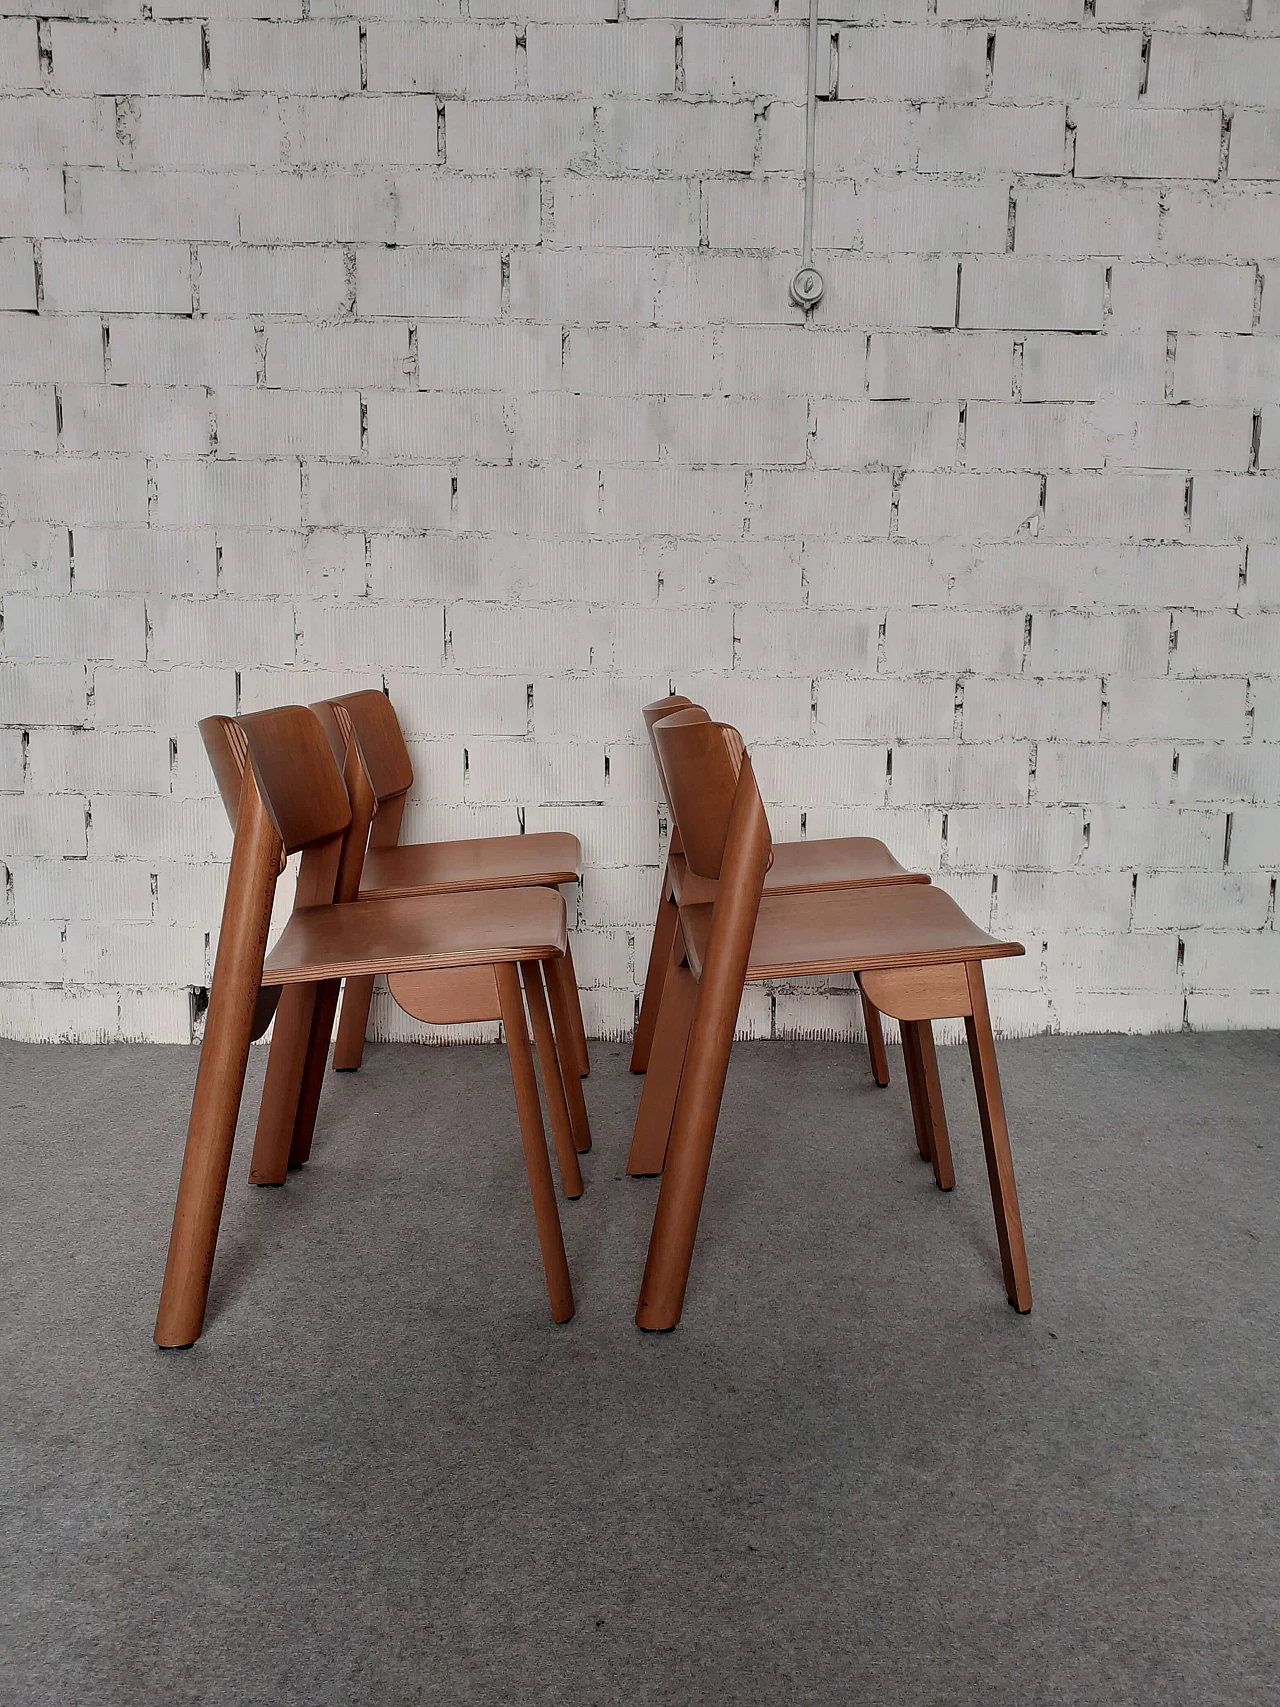 4 Wooden chairs, 1970s 3